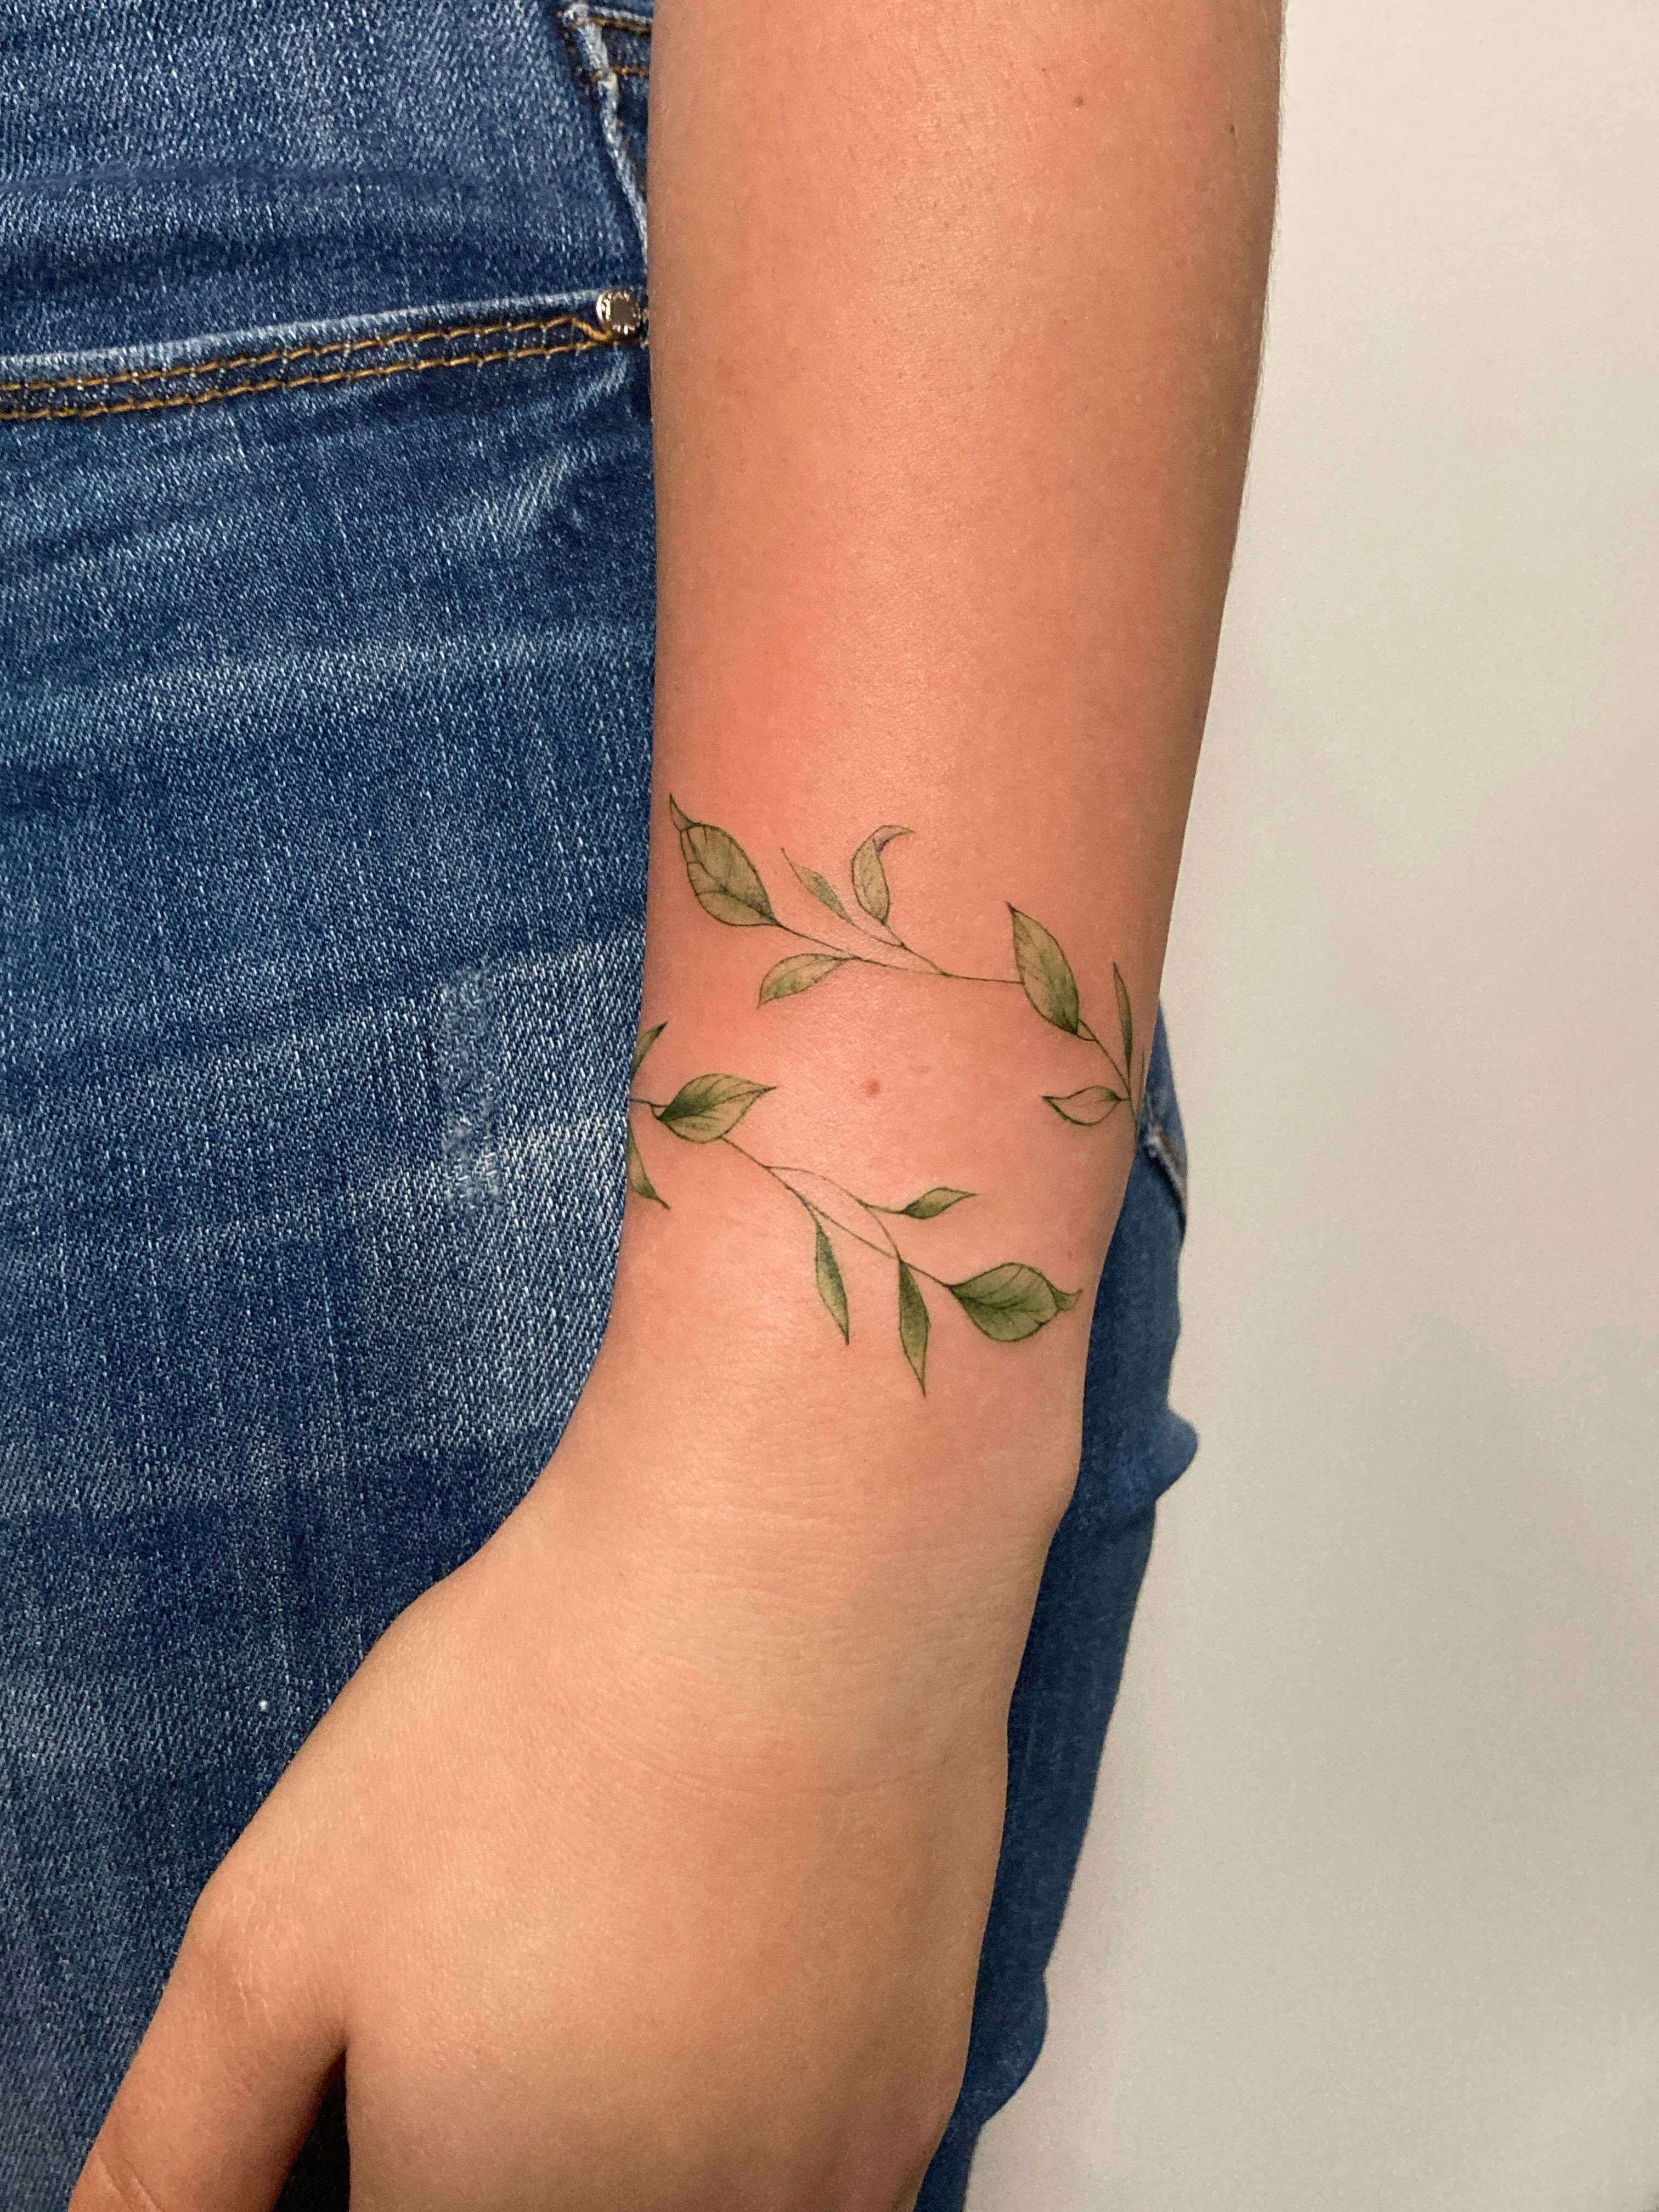 Freehand magnolia tattoo located on the forearm.